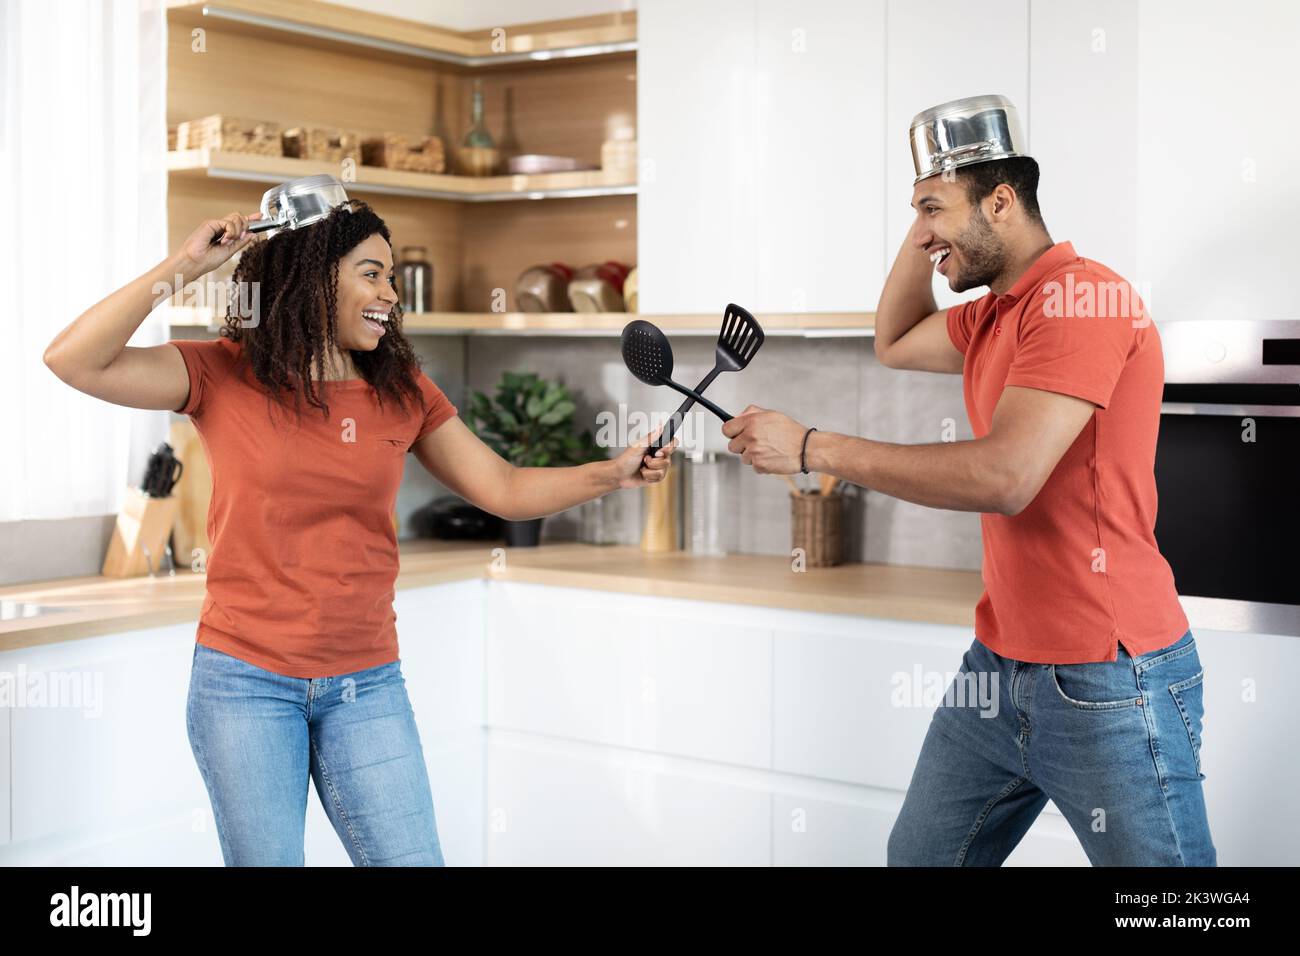 Happy millennial african american woman and man have fun, fighting with imaginary swords Stock Photo